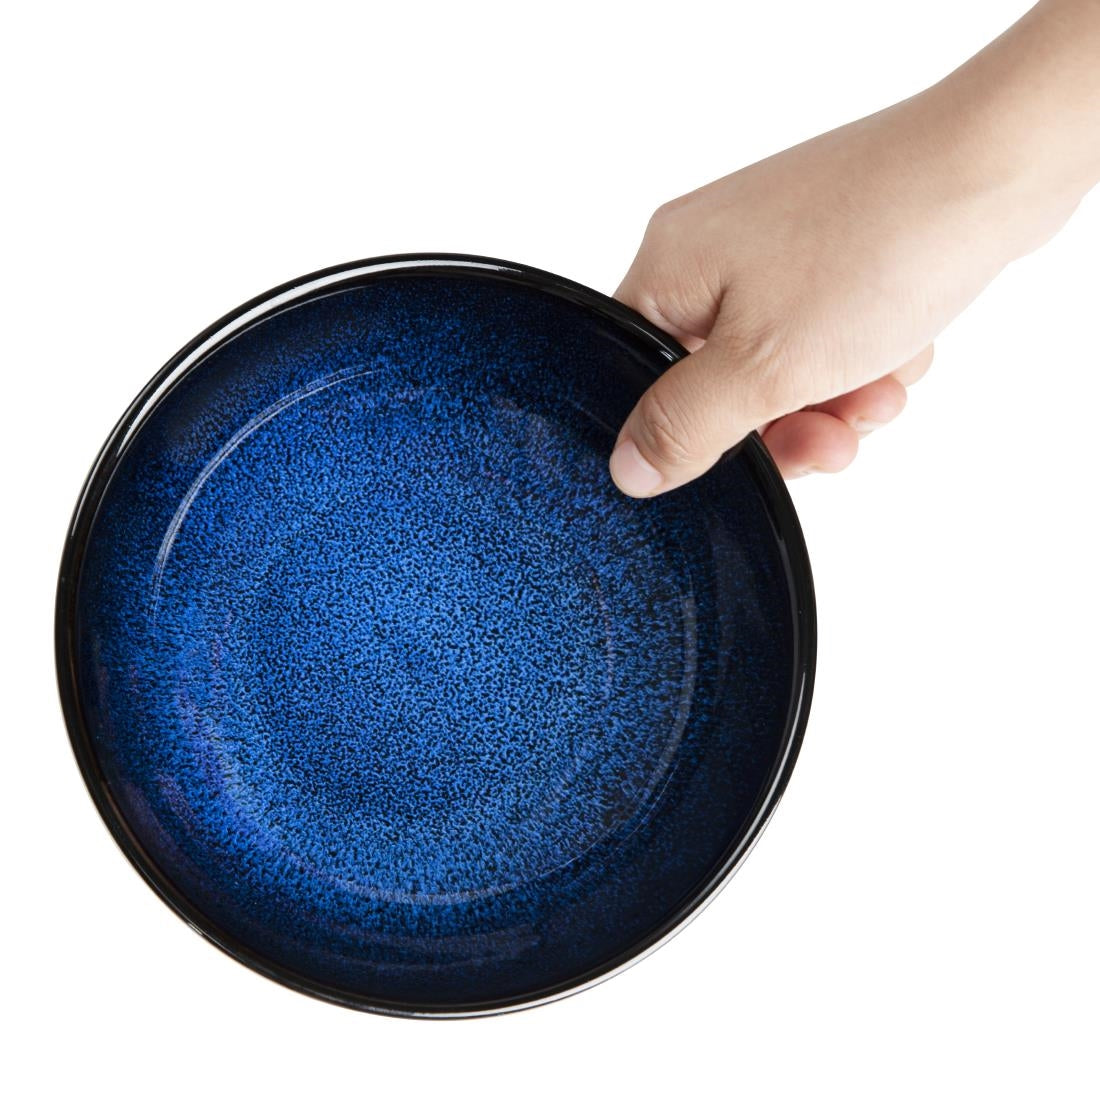 DZ772 Olympia Luna Midnight Blue Coupe Bowls 160mm (Pack of 6)